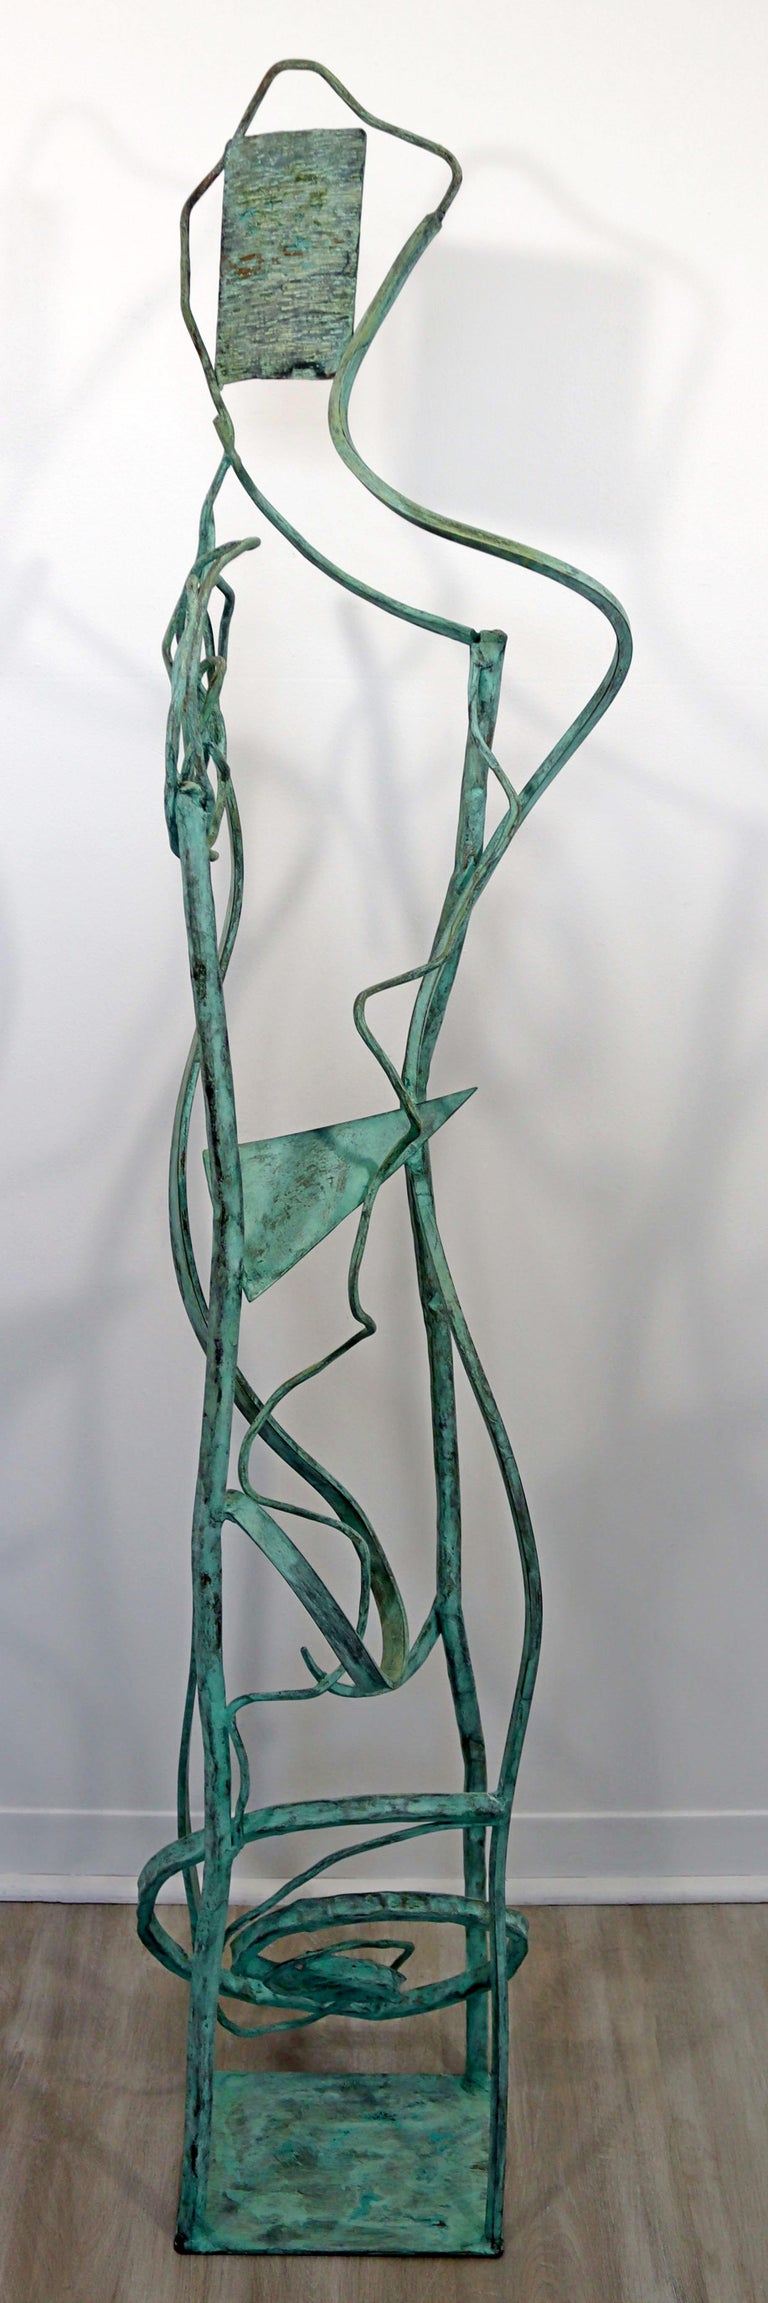 Contemporary Forged Painted Copper Metal Abstract Floor Sculpture Robert Hansen 1